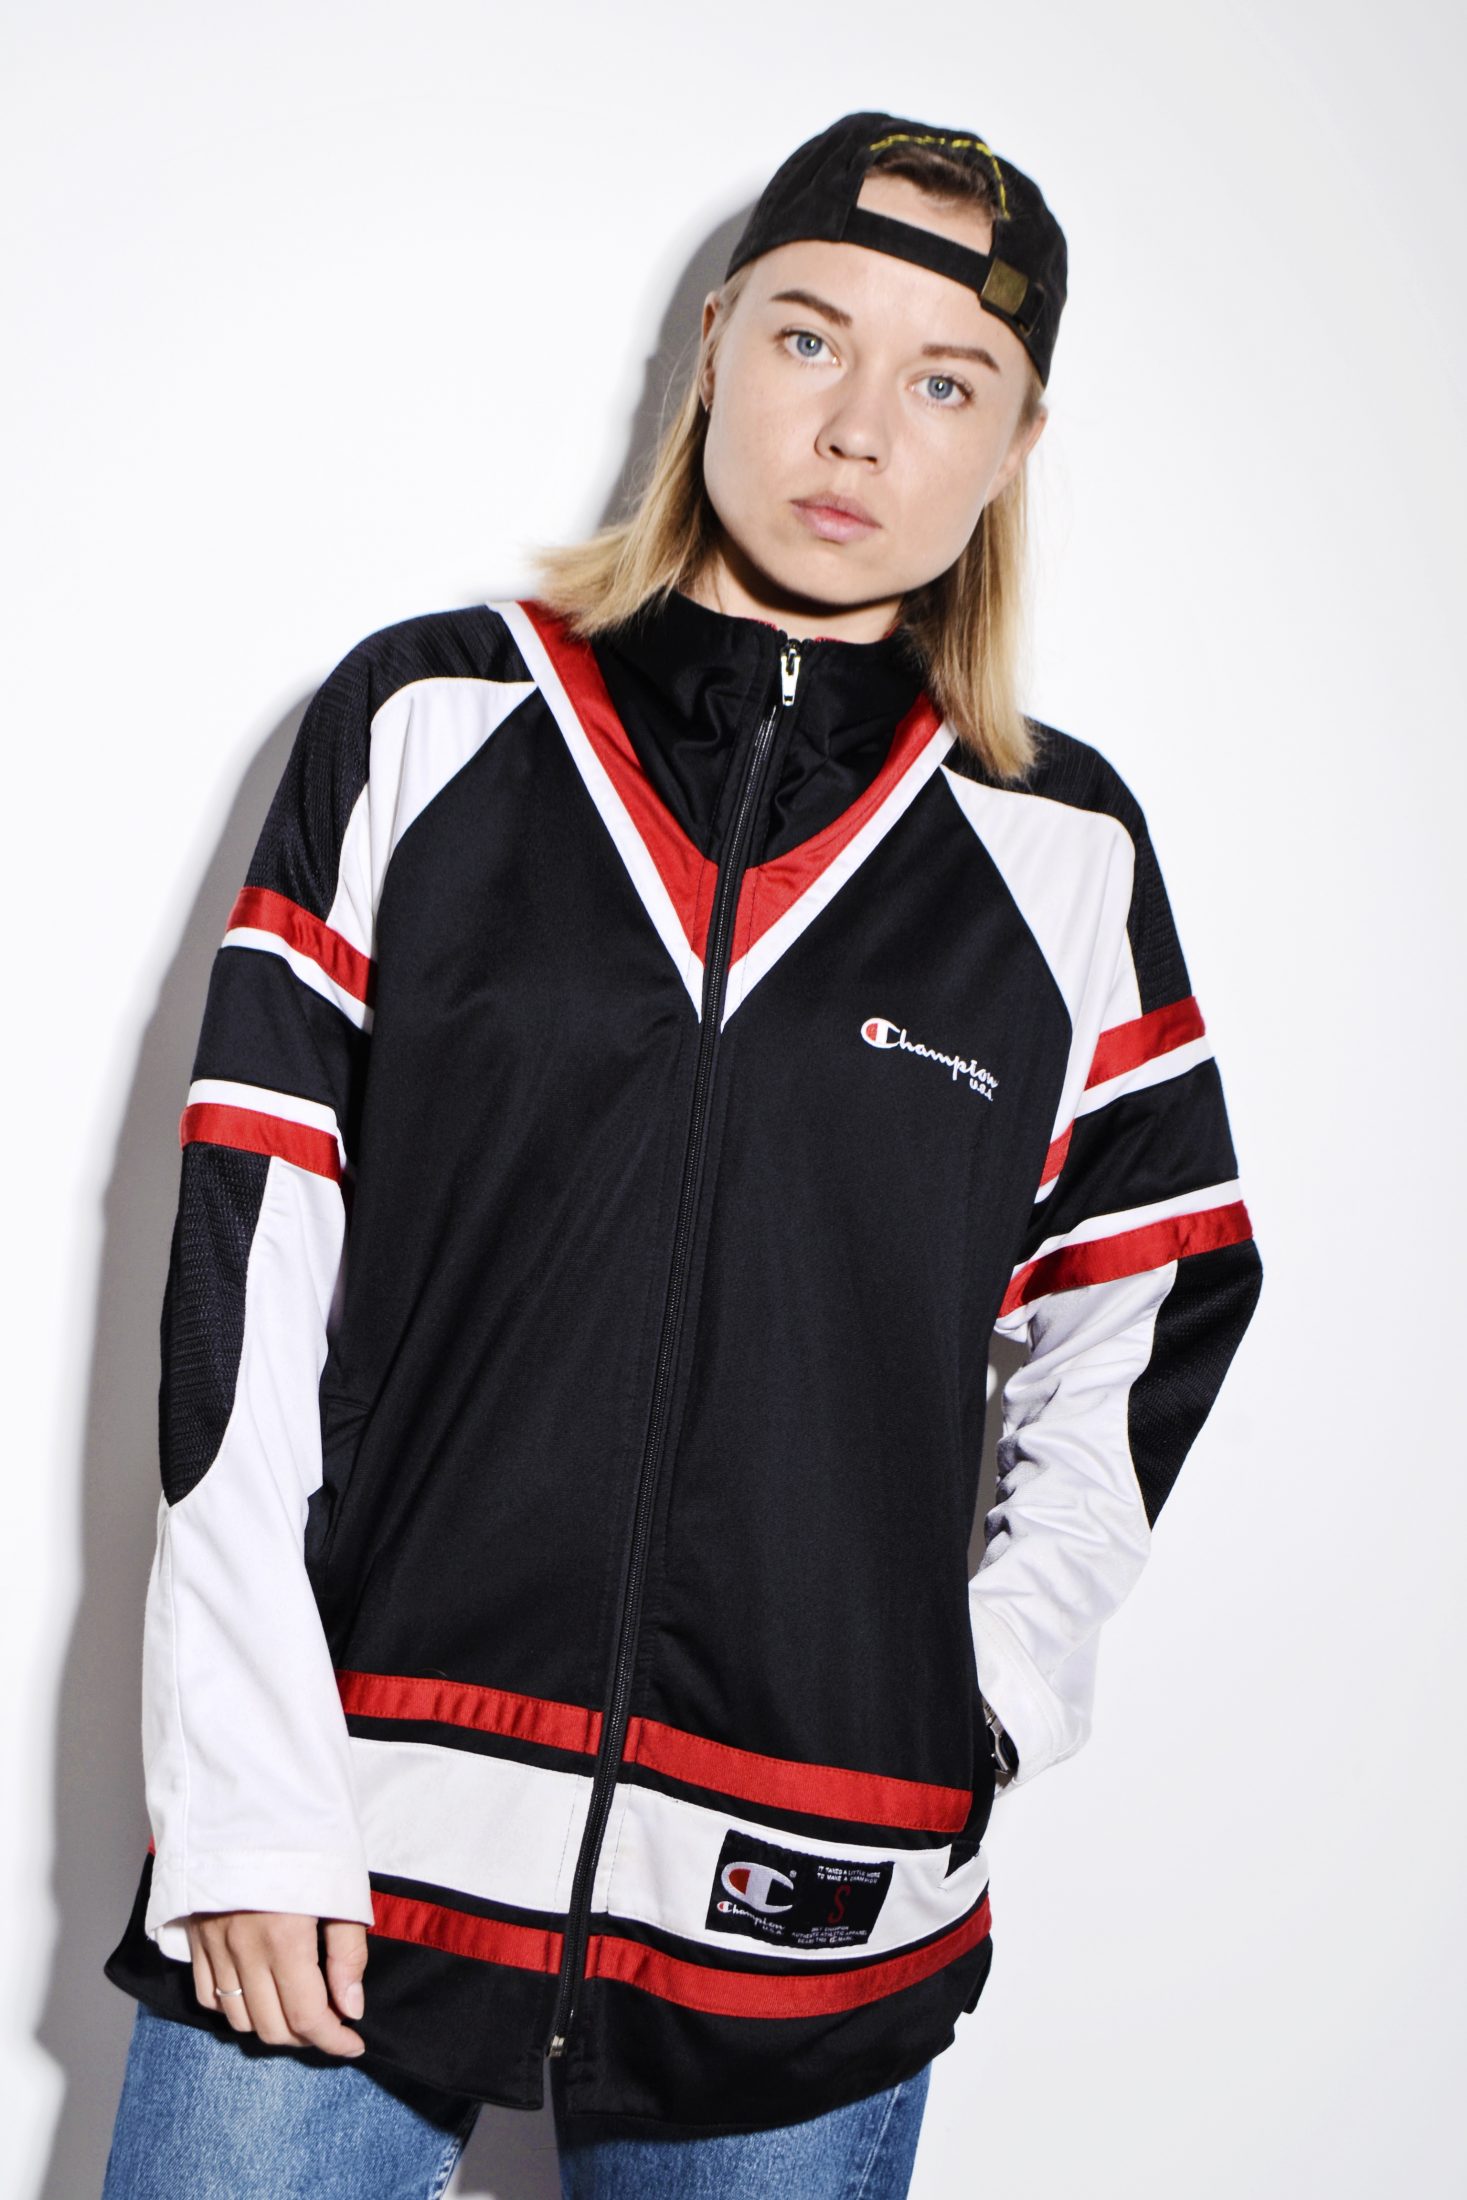 black and red champion jacket